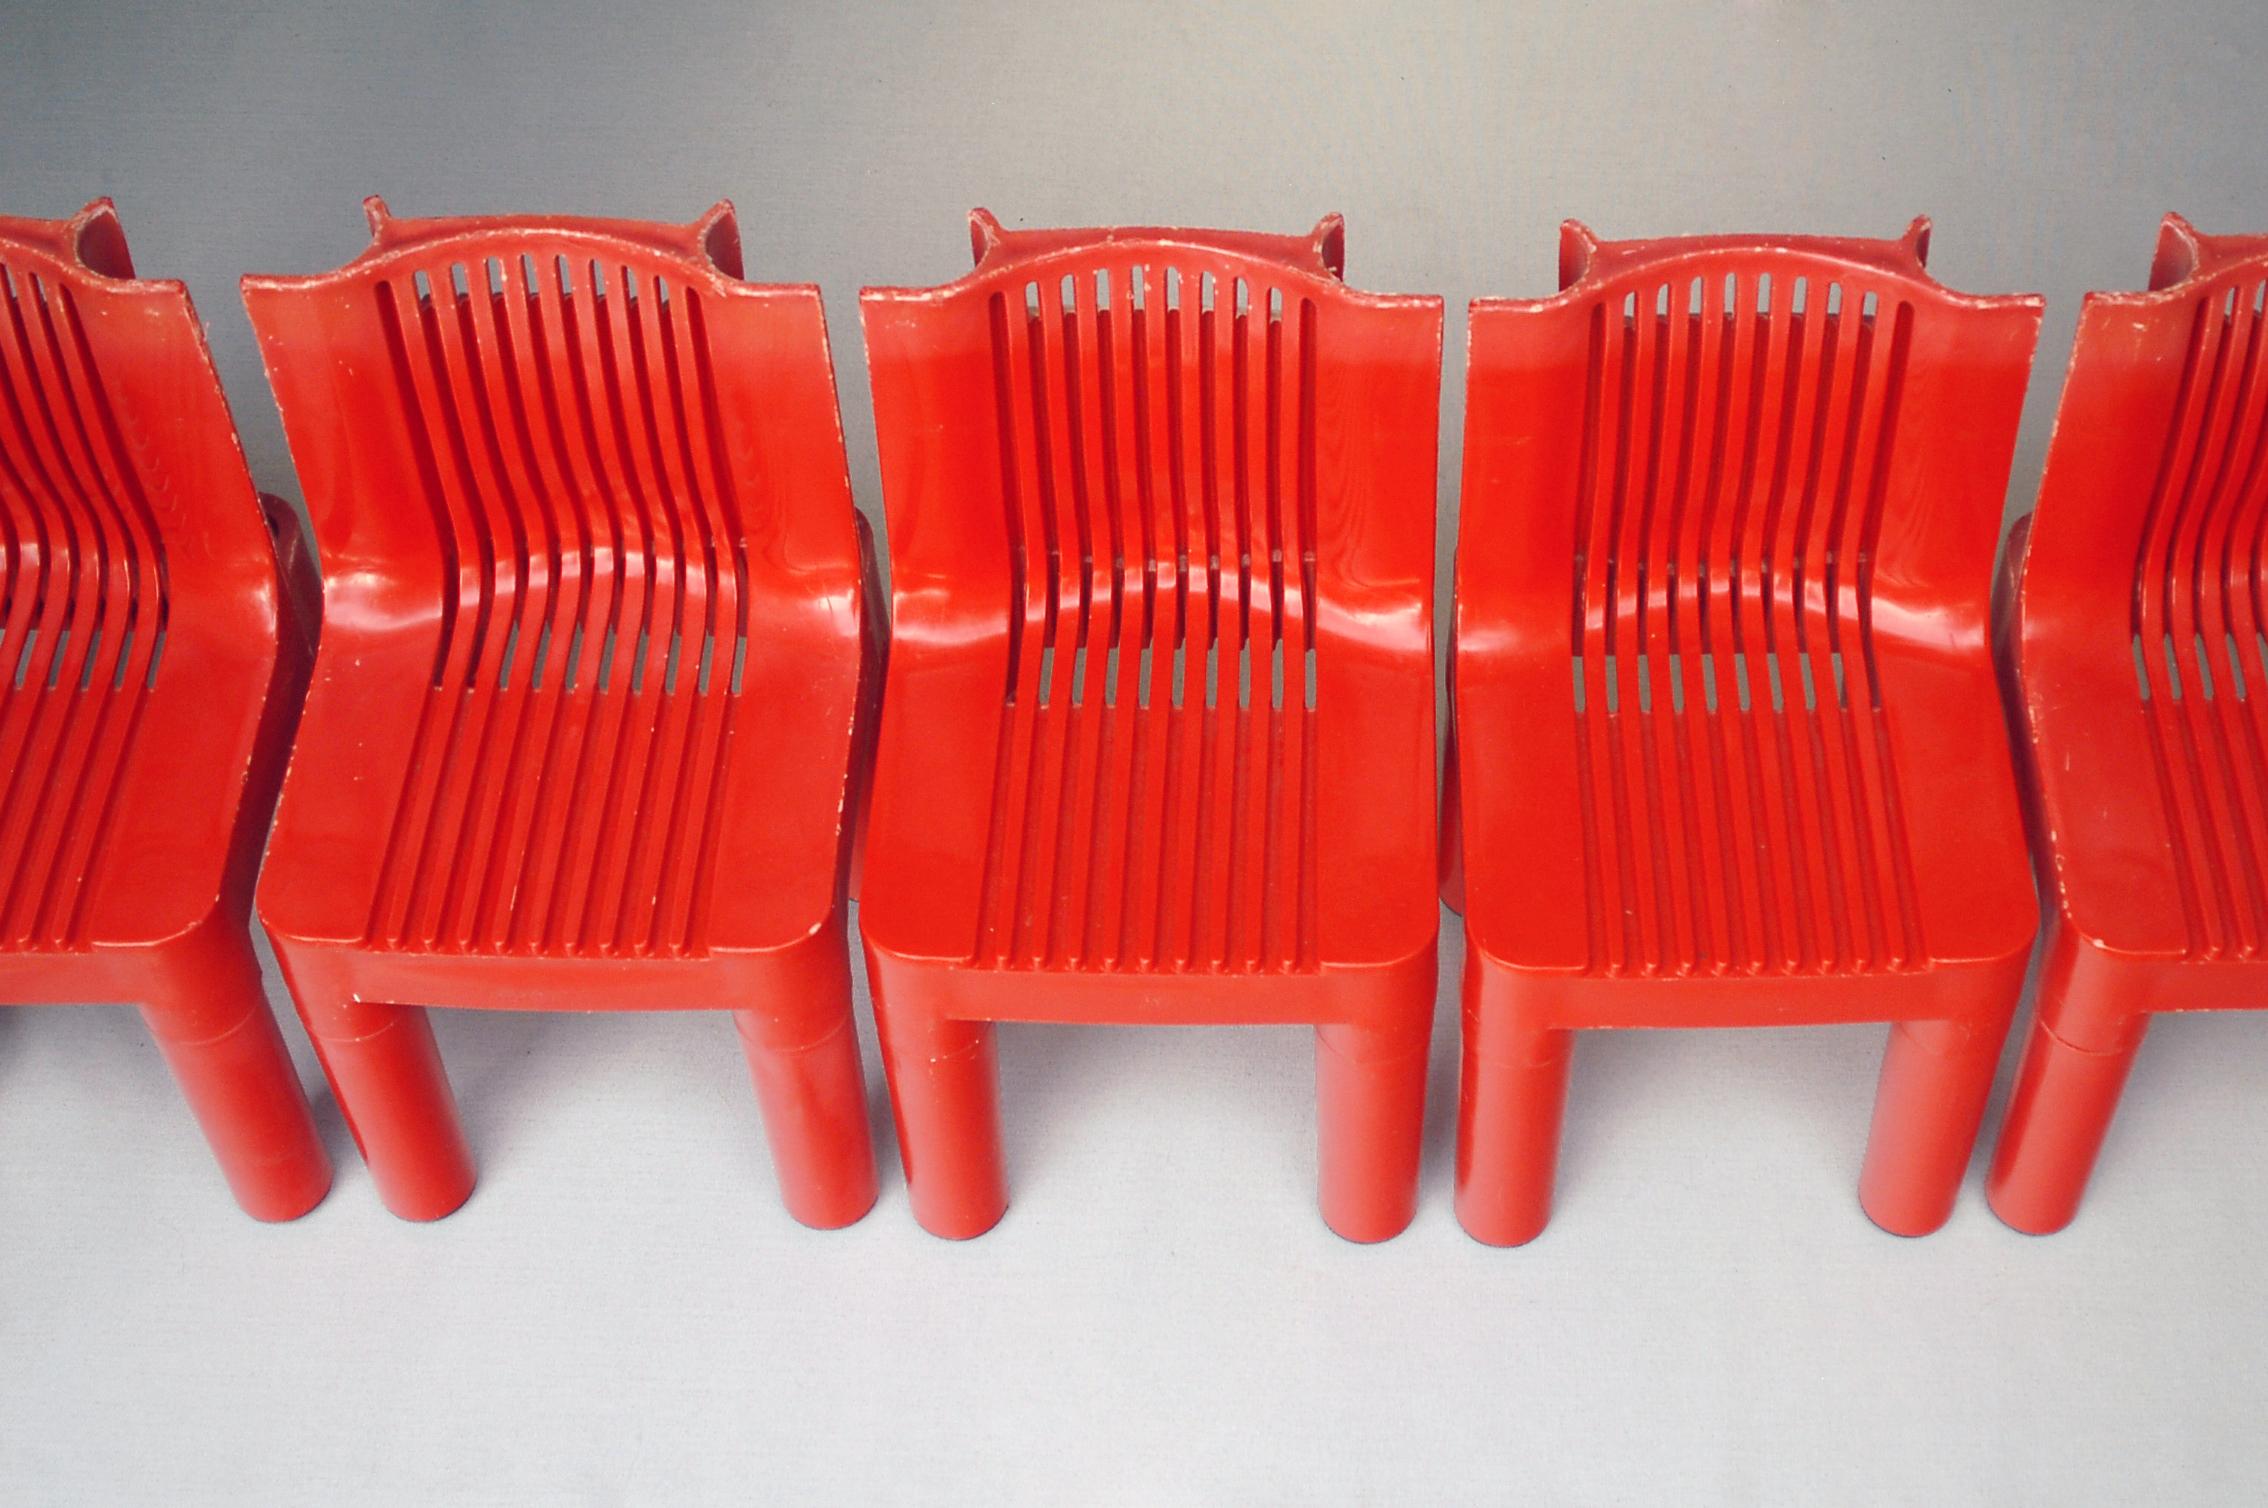 Molded Chair model 4999 Kartell Marco Zanuso / Richard Sapper 1964 First production 6x For Sale